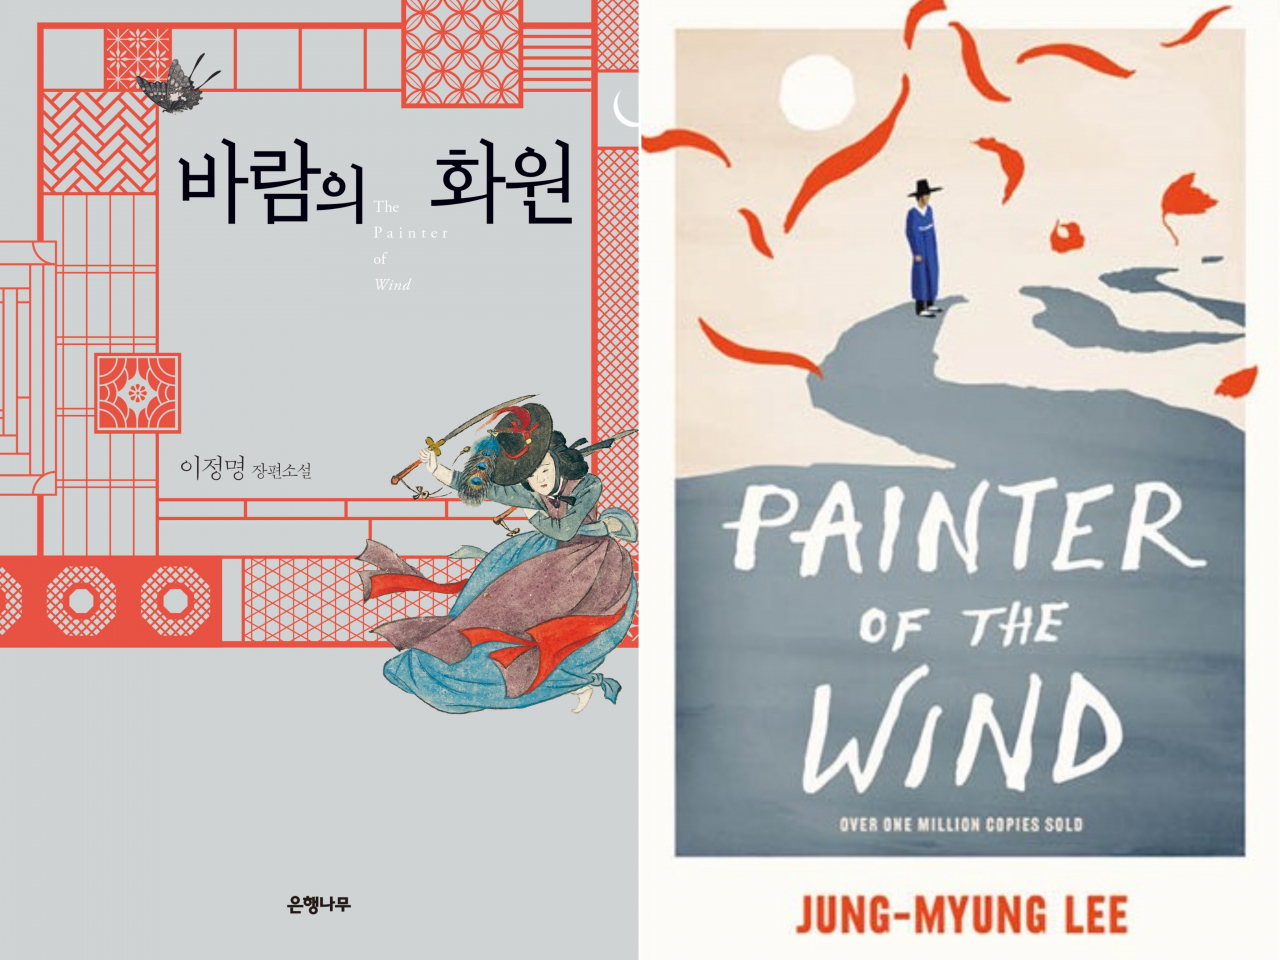 The Korean edition (left) and English edition of 